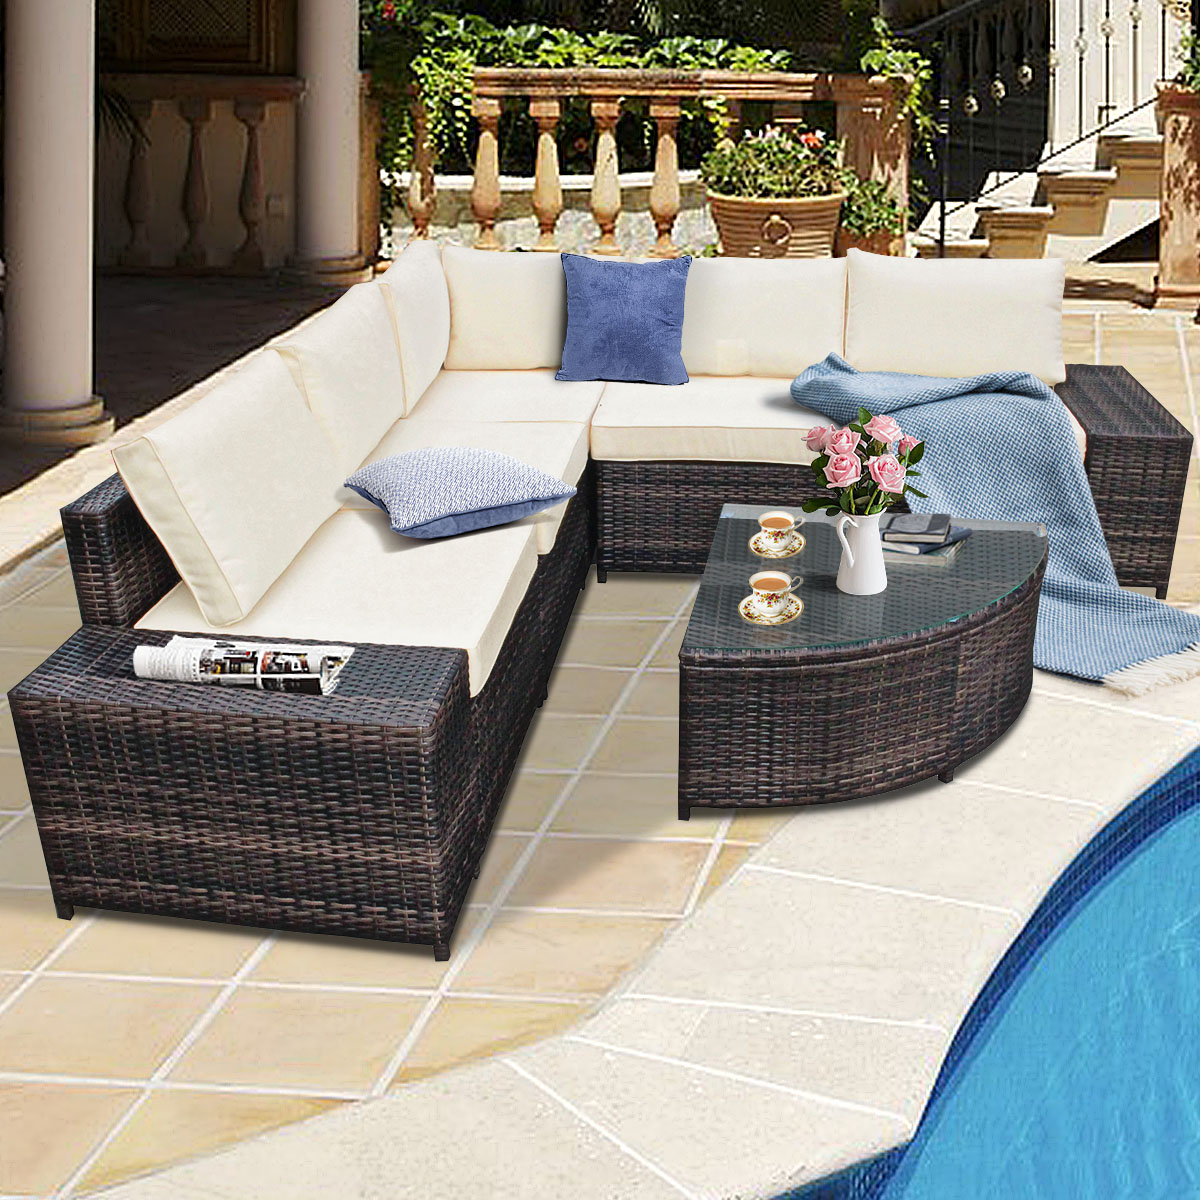 Patiojoy 6-Piece Outdoor Rattan Conversation Set Sectional Sofa Set with Arc-Shaped Table White - image 3 of 6